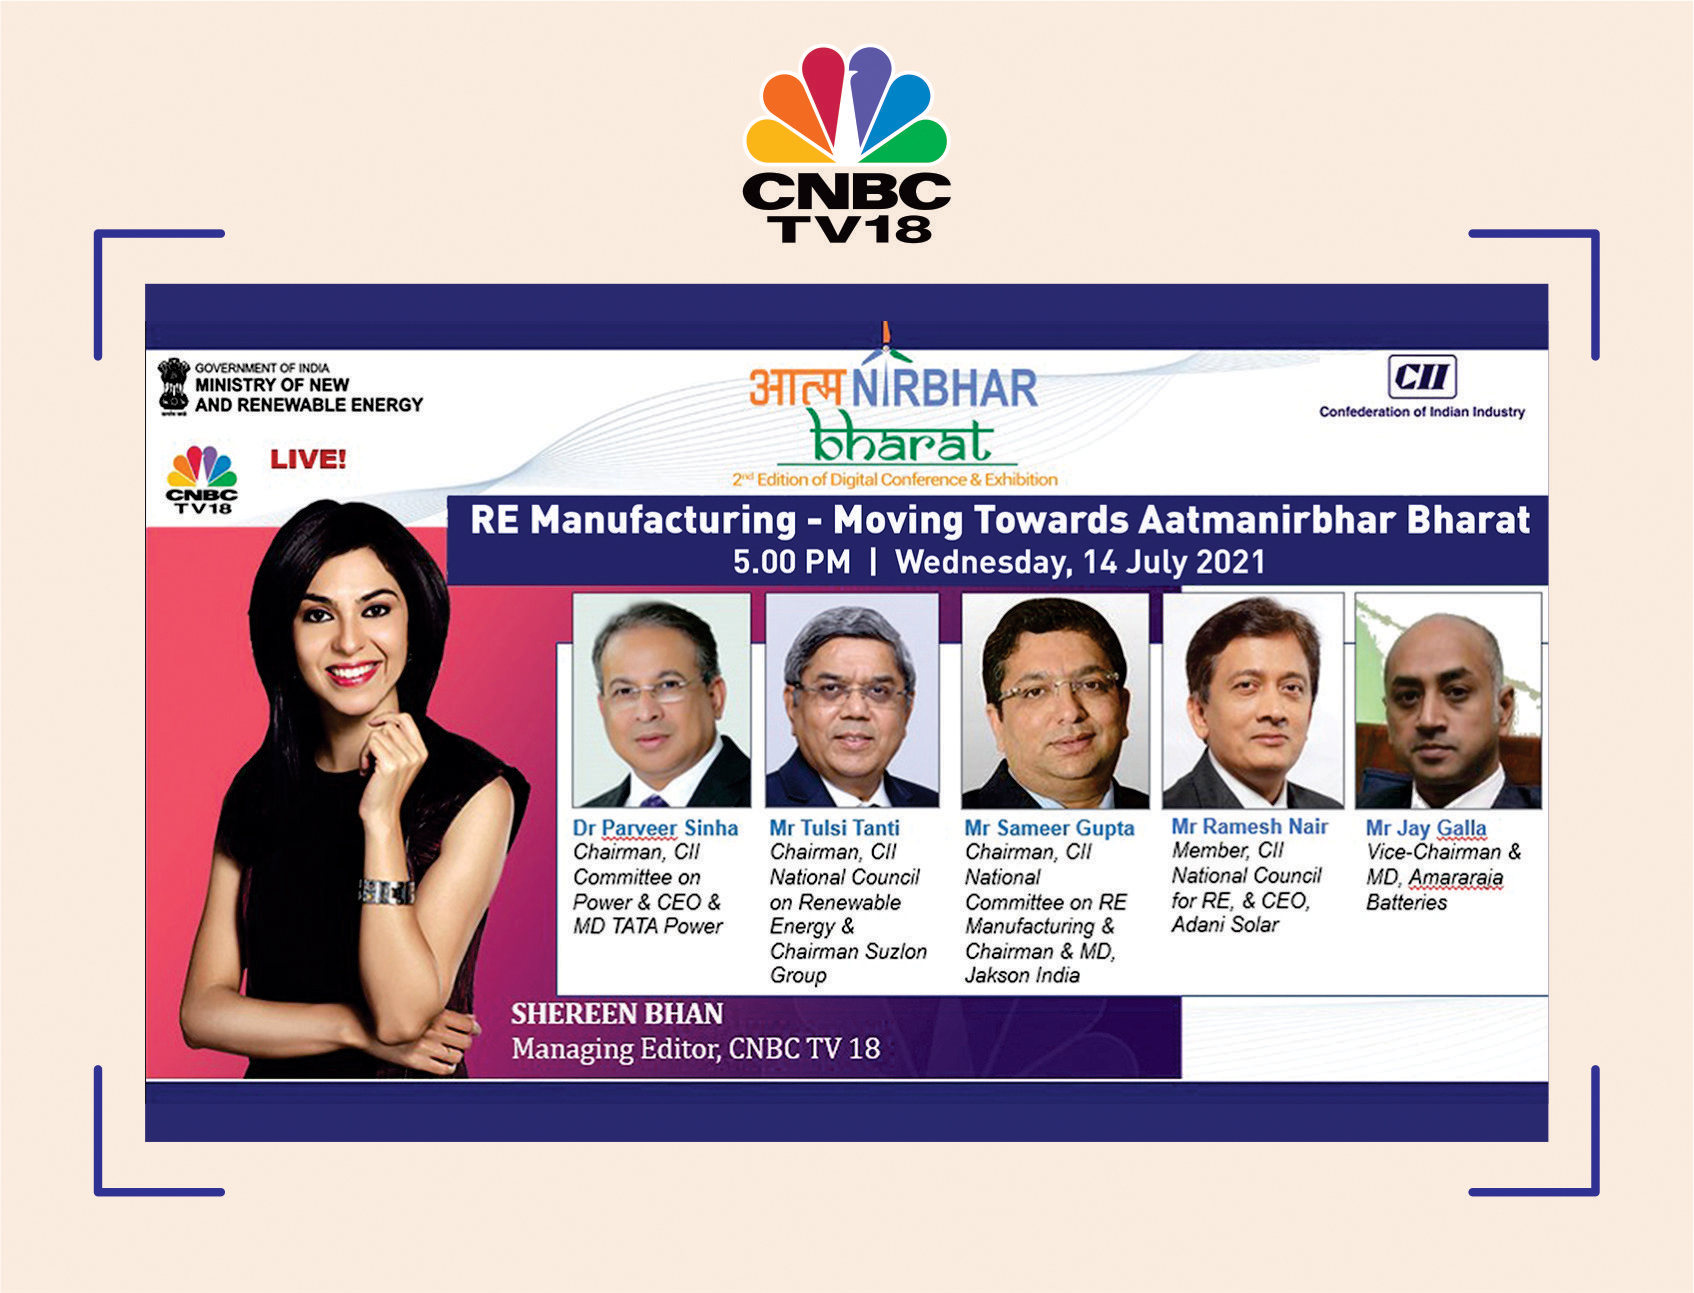 CNBC PANEL DISCUSSION